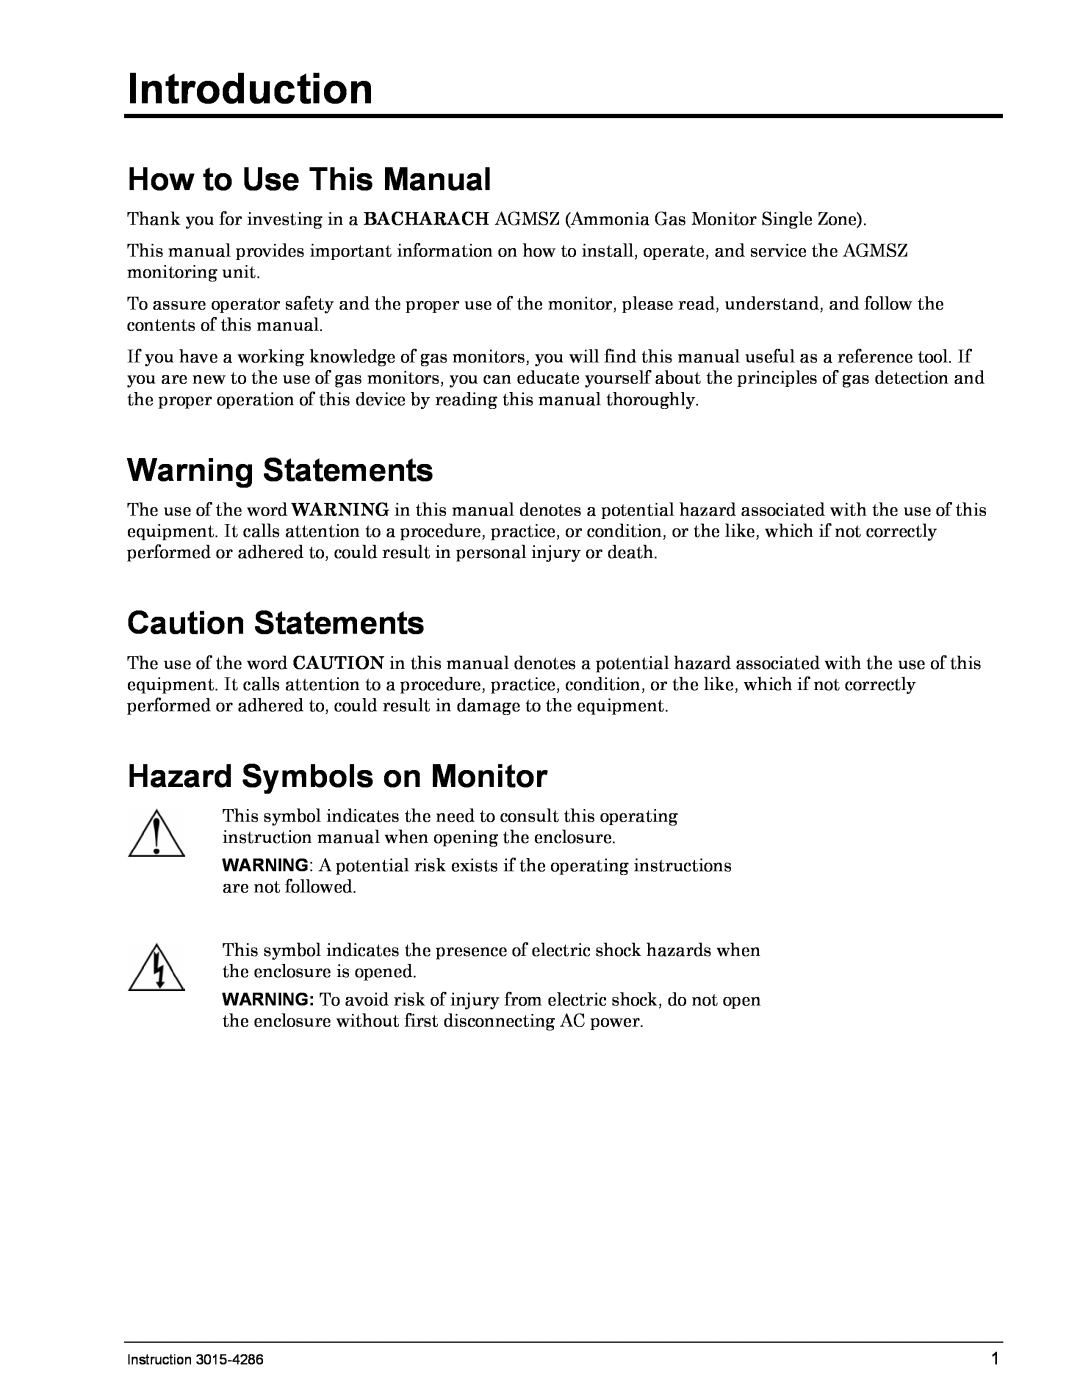 Bacharach 3015-4286 manual Introduction, How to Use This Manual, Warning Statements, Caution Statements 